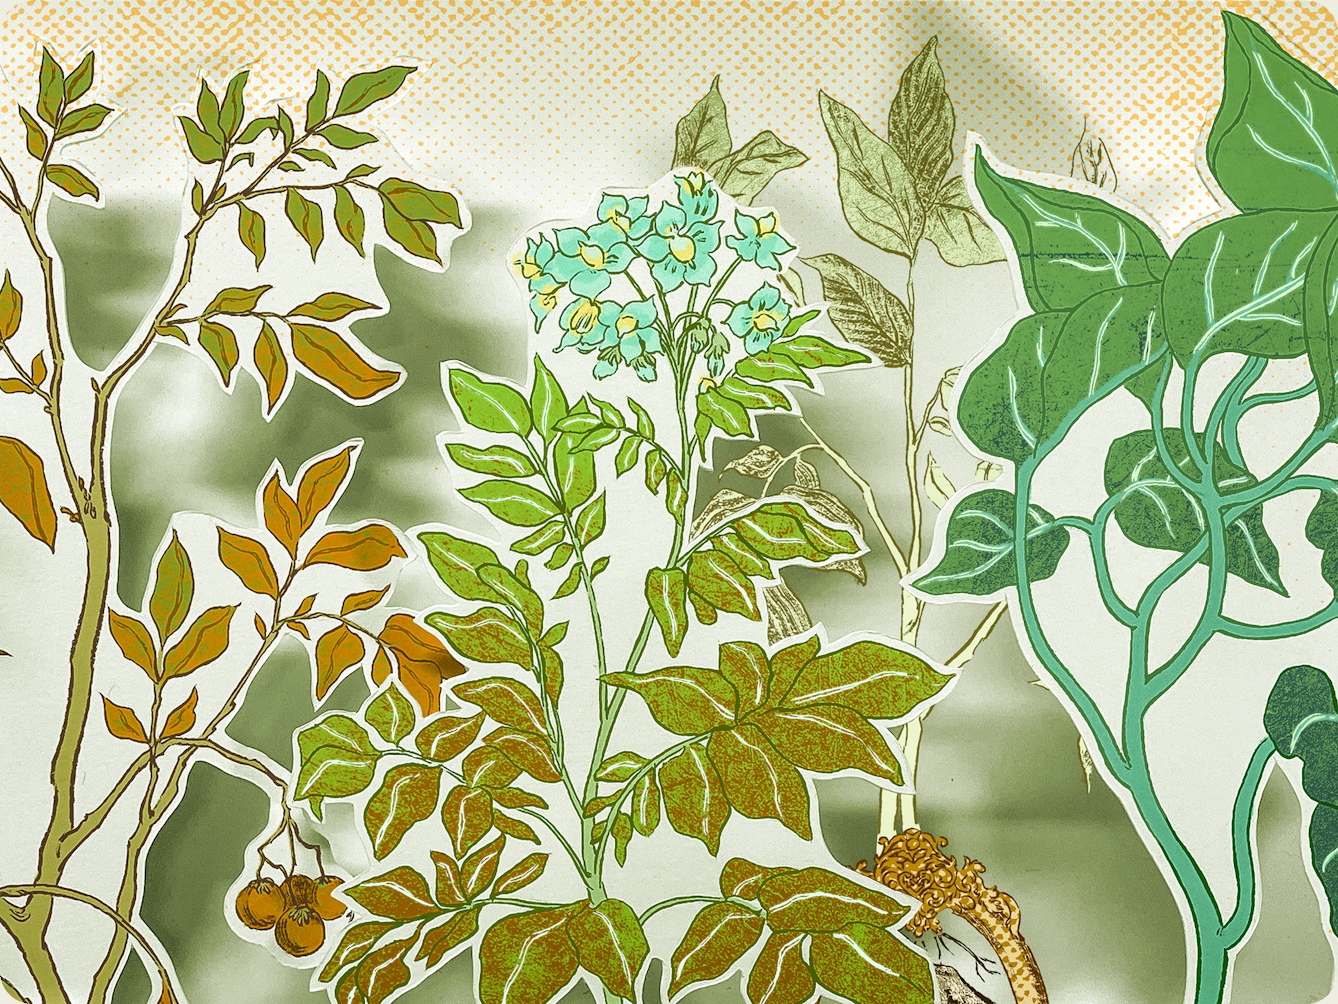 Photograph of a papercut 3D artwork. Detail from a larger artwork which shows a family tree like diagram of six potatoes. This detail pictures the different coloured leaves growing out of each potato which form a large canopy of foliage and flowers. 